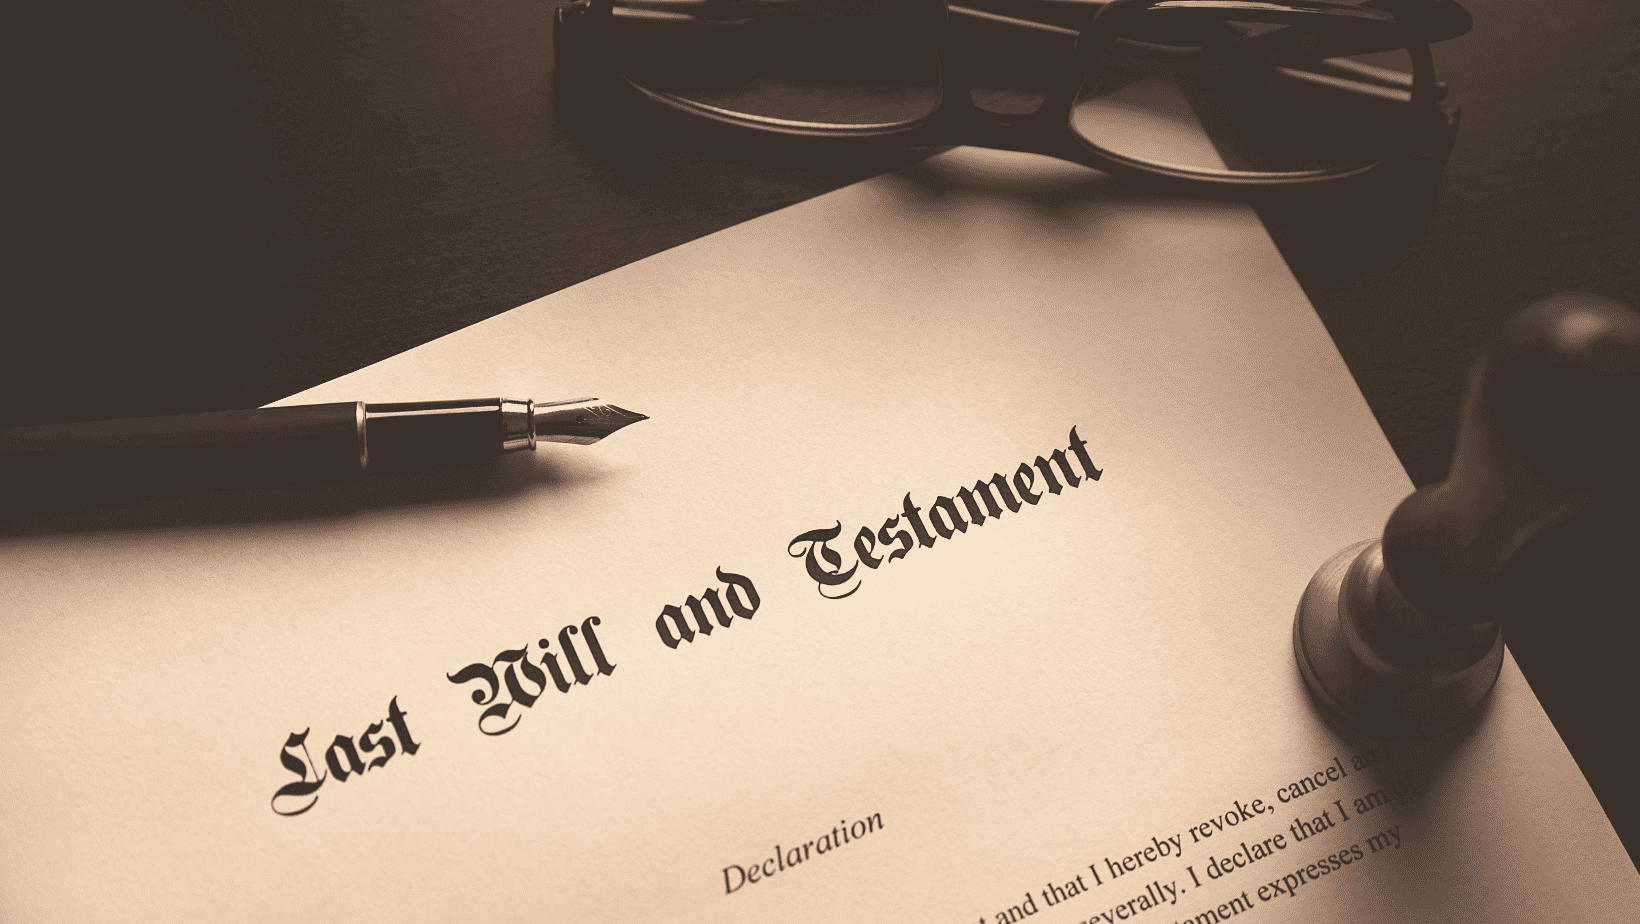 An image illustrating the differences between wills and trusts, highlighting the advantages and disadvantages of wills versus trust.